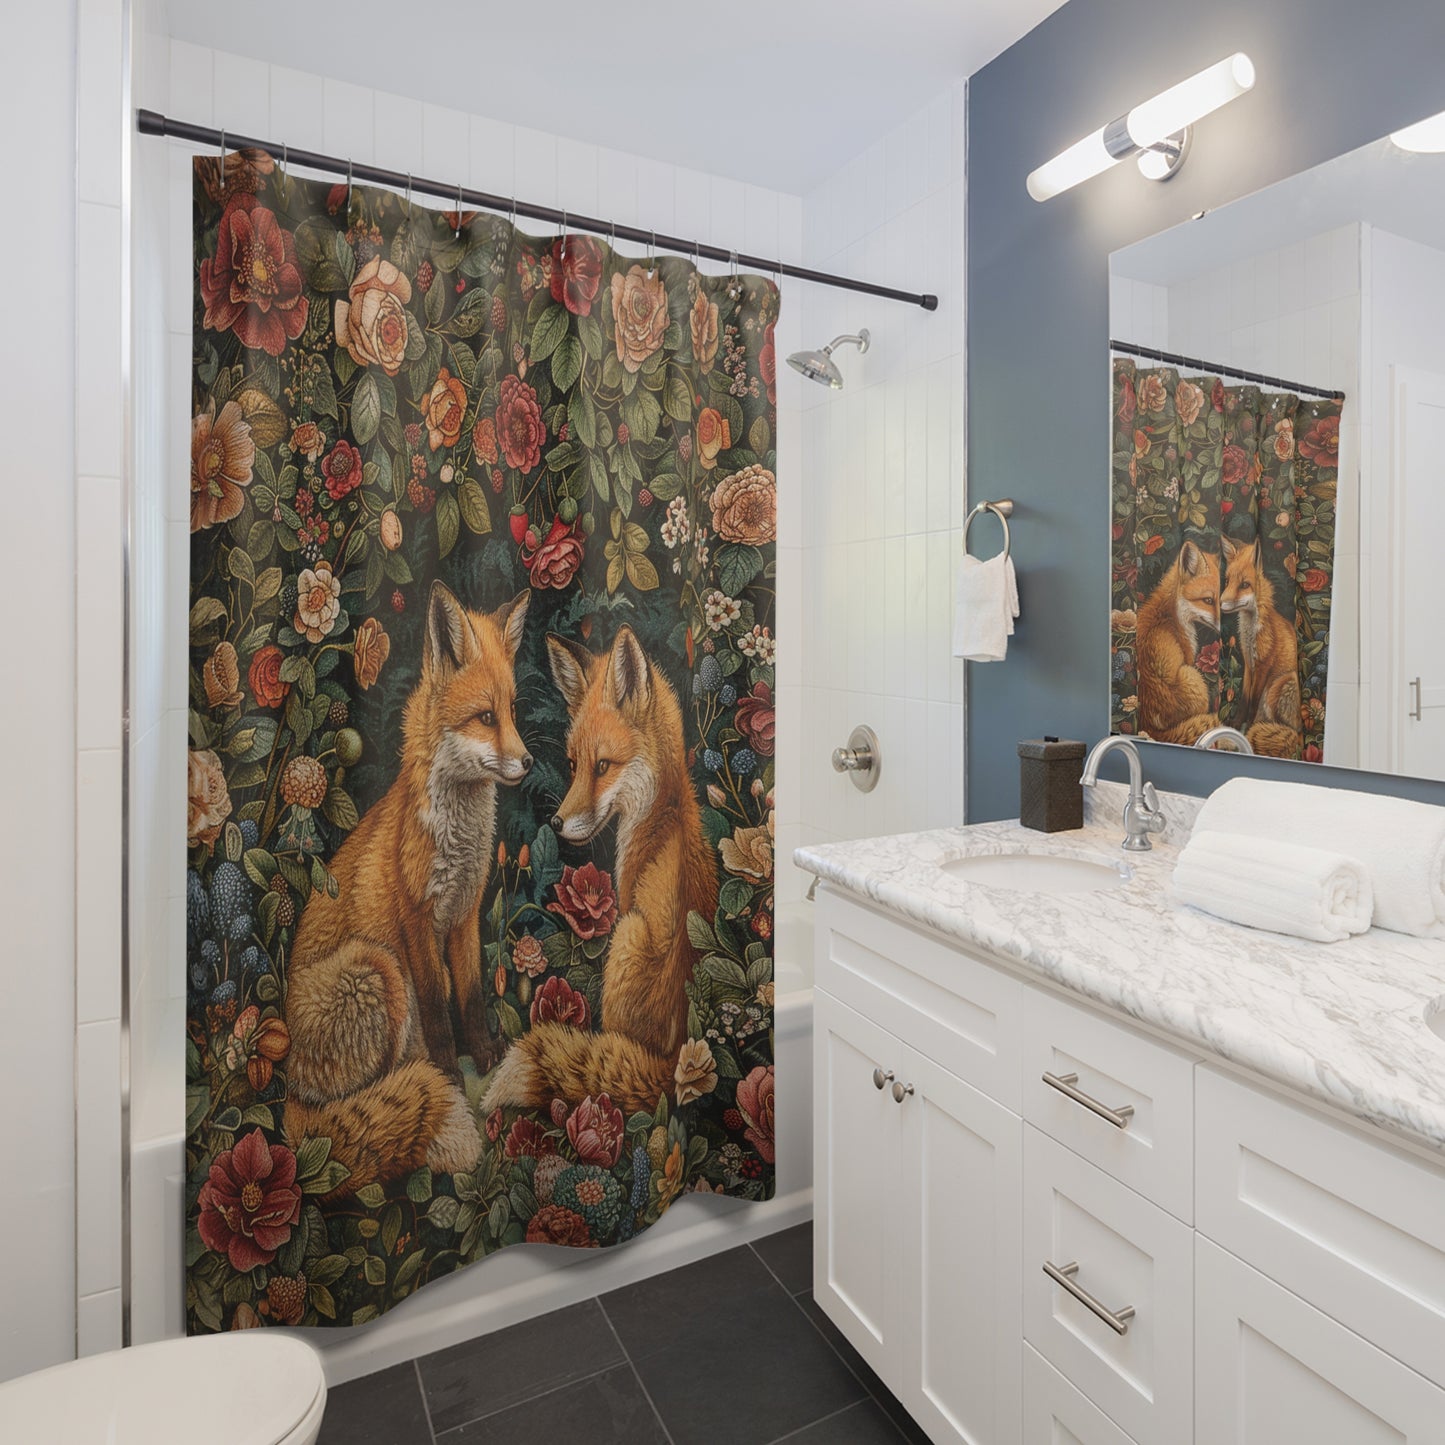 Fox Couple in Floral Garden Shower Curtain William Morris Inspired Home Decor Shower Curtain 71" x 74"